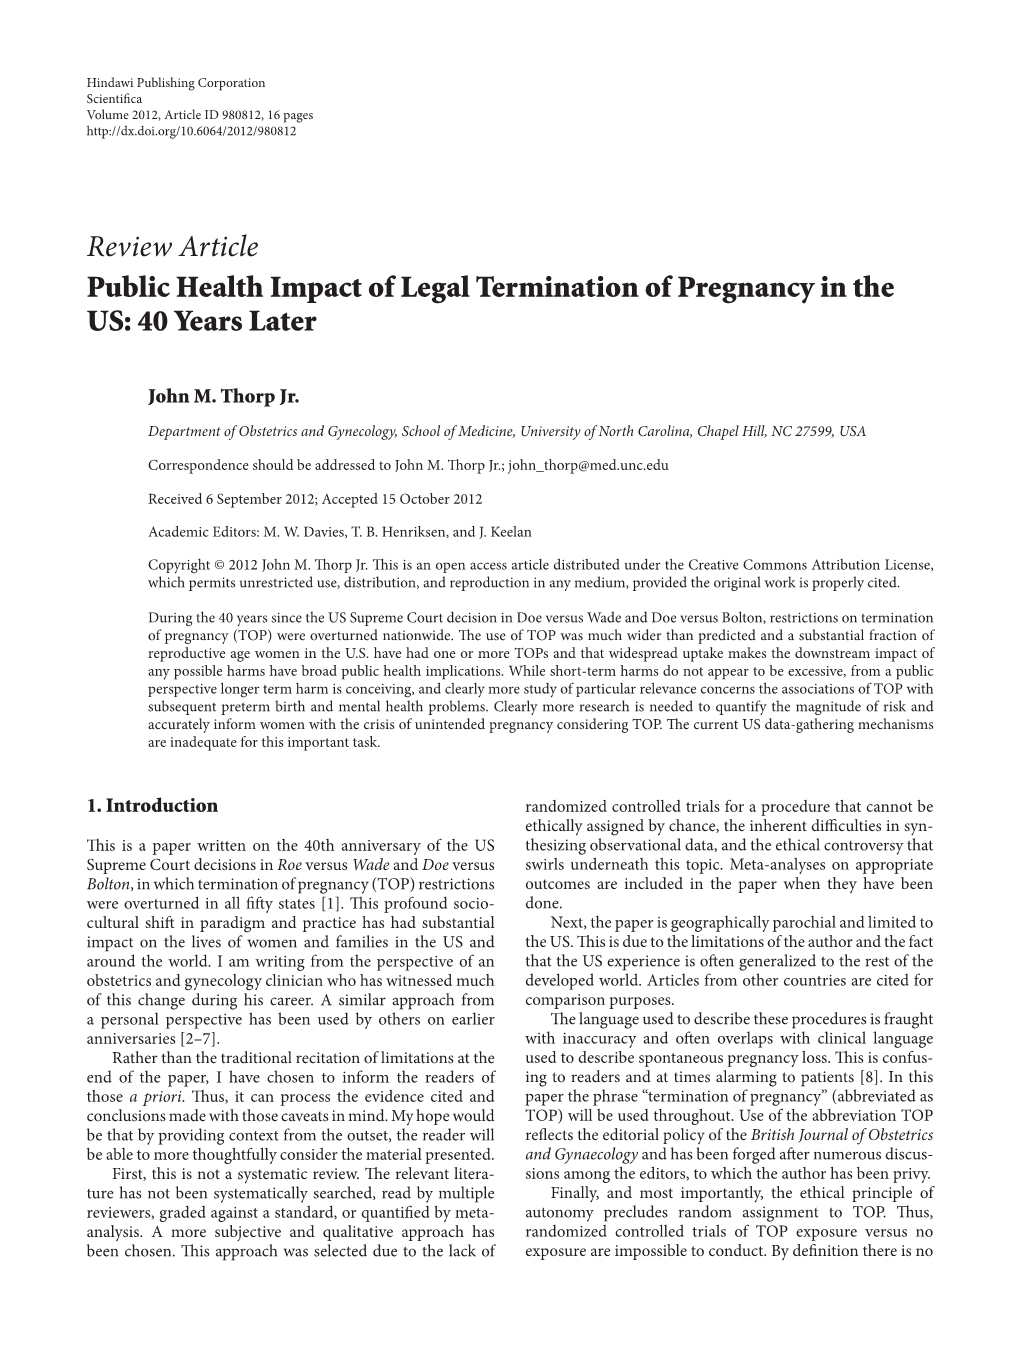 Public Health Impact of Legal Termination of Pregnancy in the US: 40 Years Later